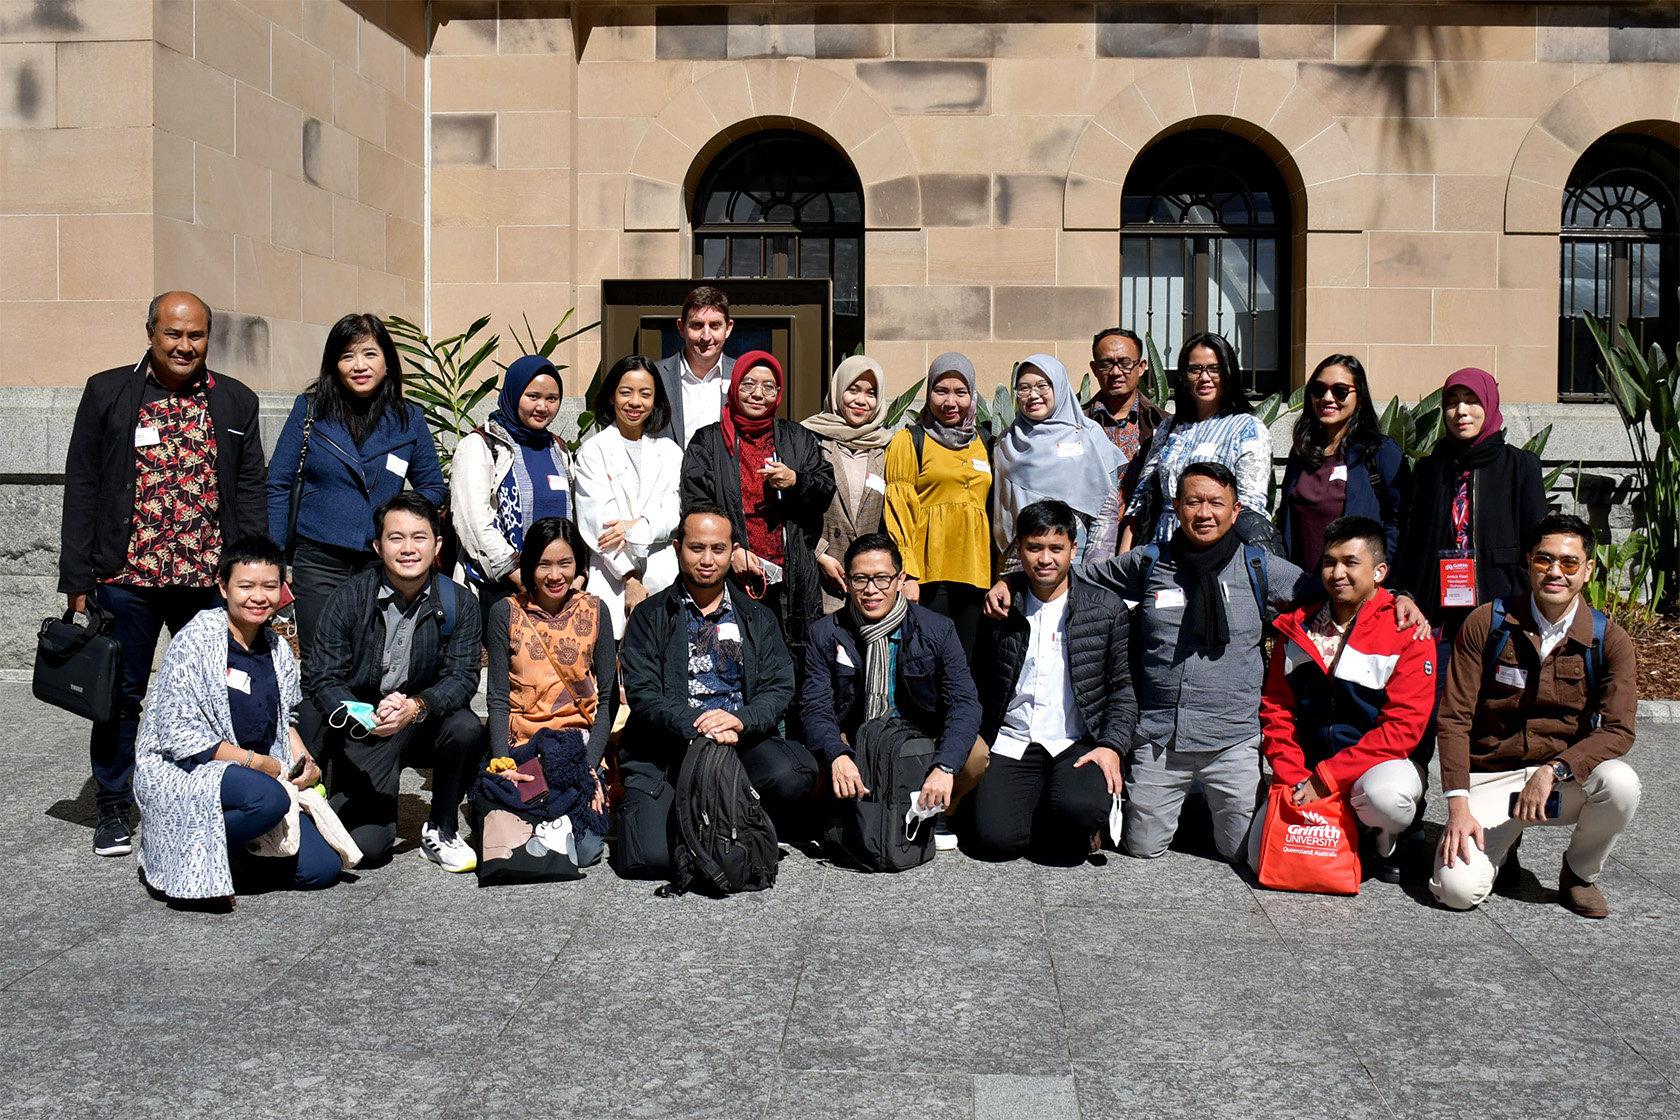 Participants take a photo together in front of a building